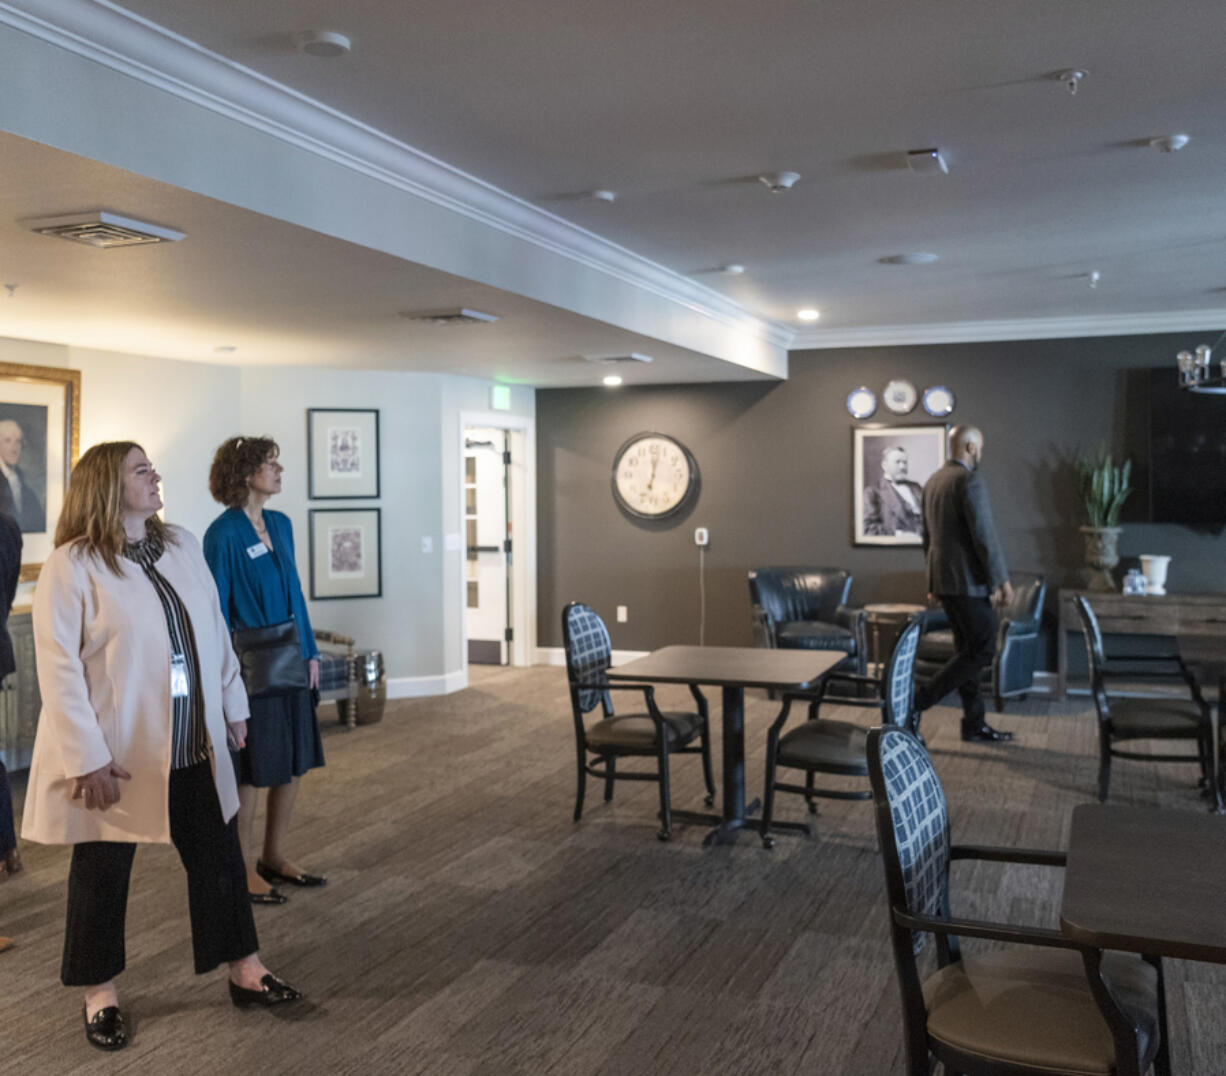 Employment Security Department Commissioner Cami Feek, left, and Workforce Southwest Washington Director of Communications Julia Maglione, right, look around a room during a Workforce Southwest Washington tour of The Inn at University Village assisted living facility.